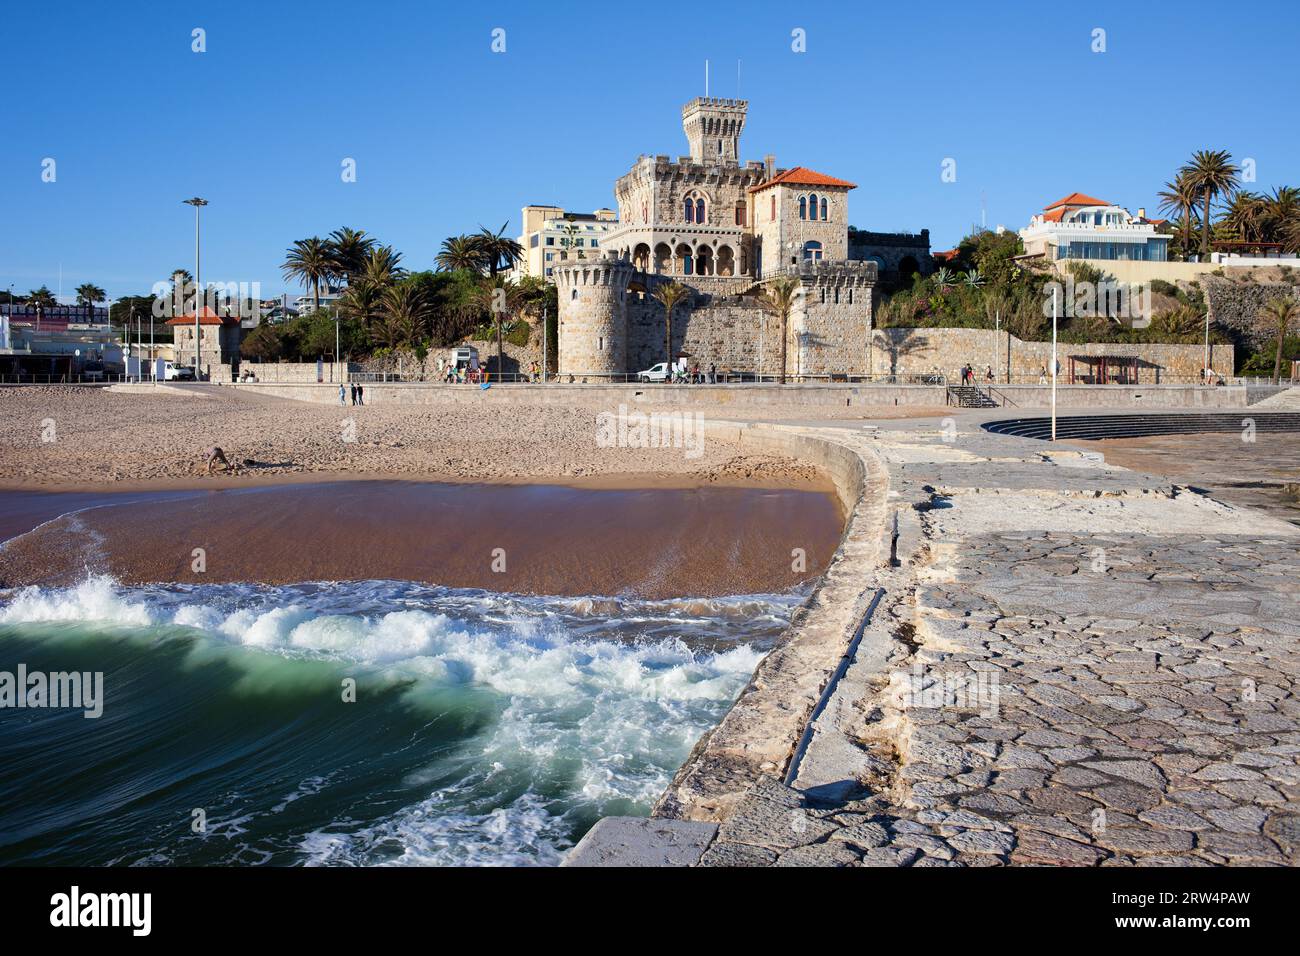 Picturesque resort town of Estoril in Portugal, castle, pier and sandy beach by the Atlantic Ocean Stock Photo